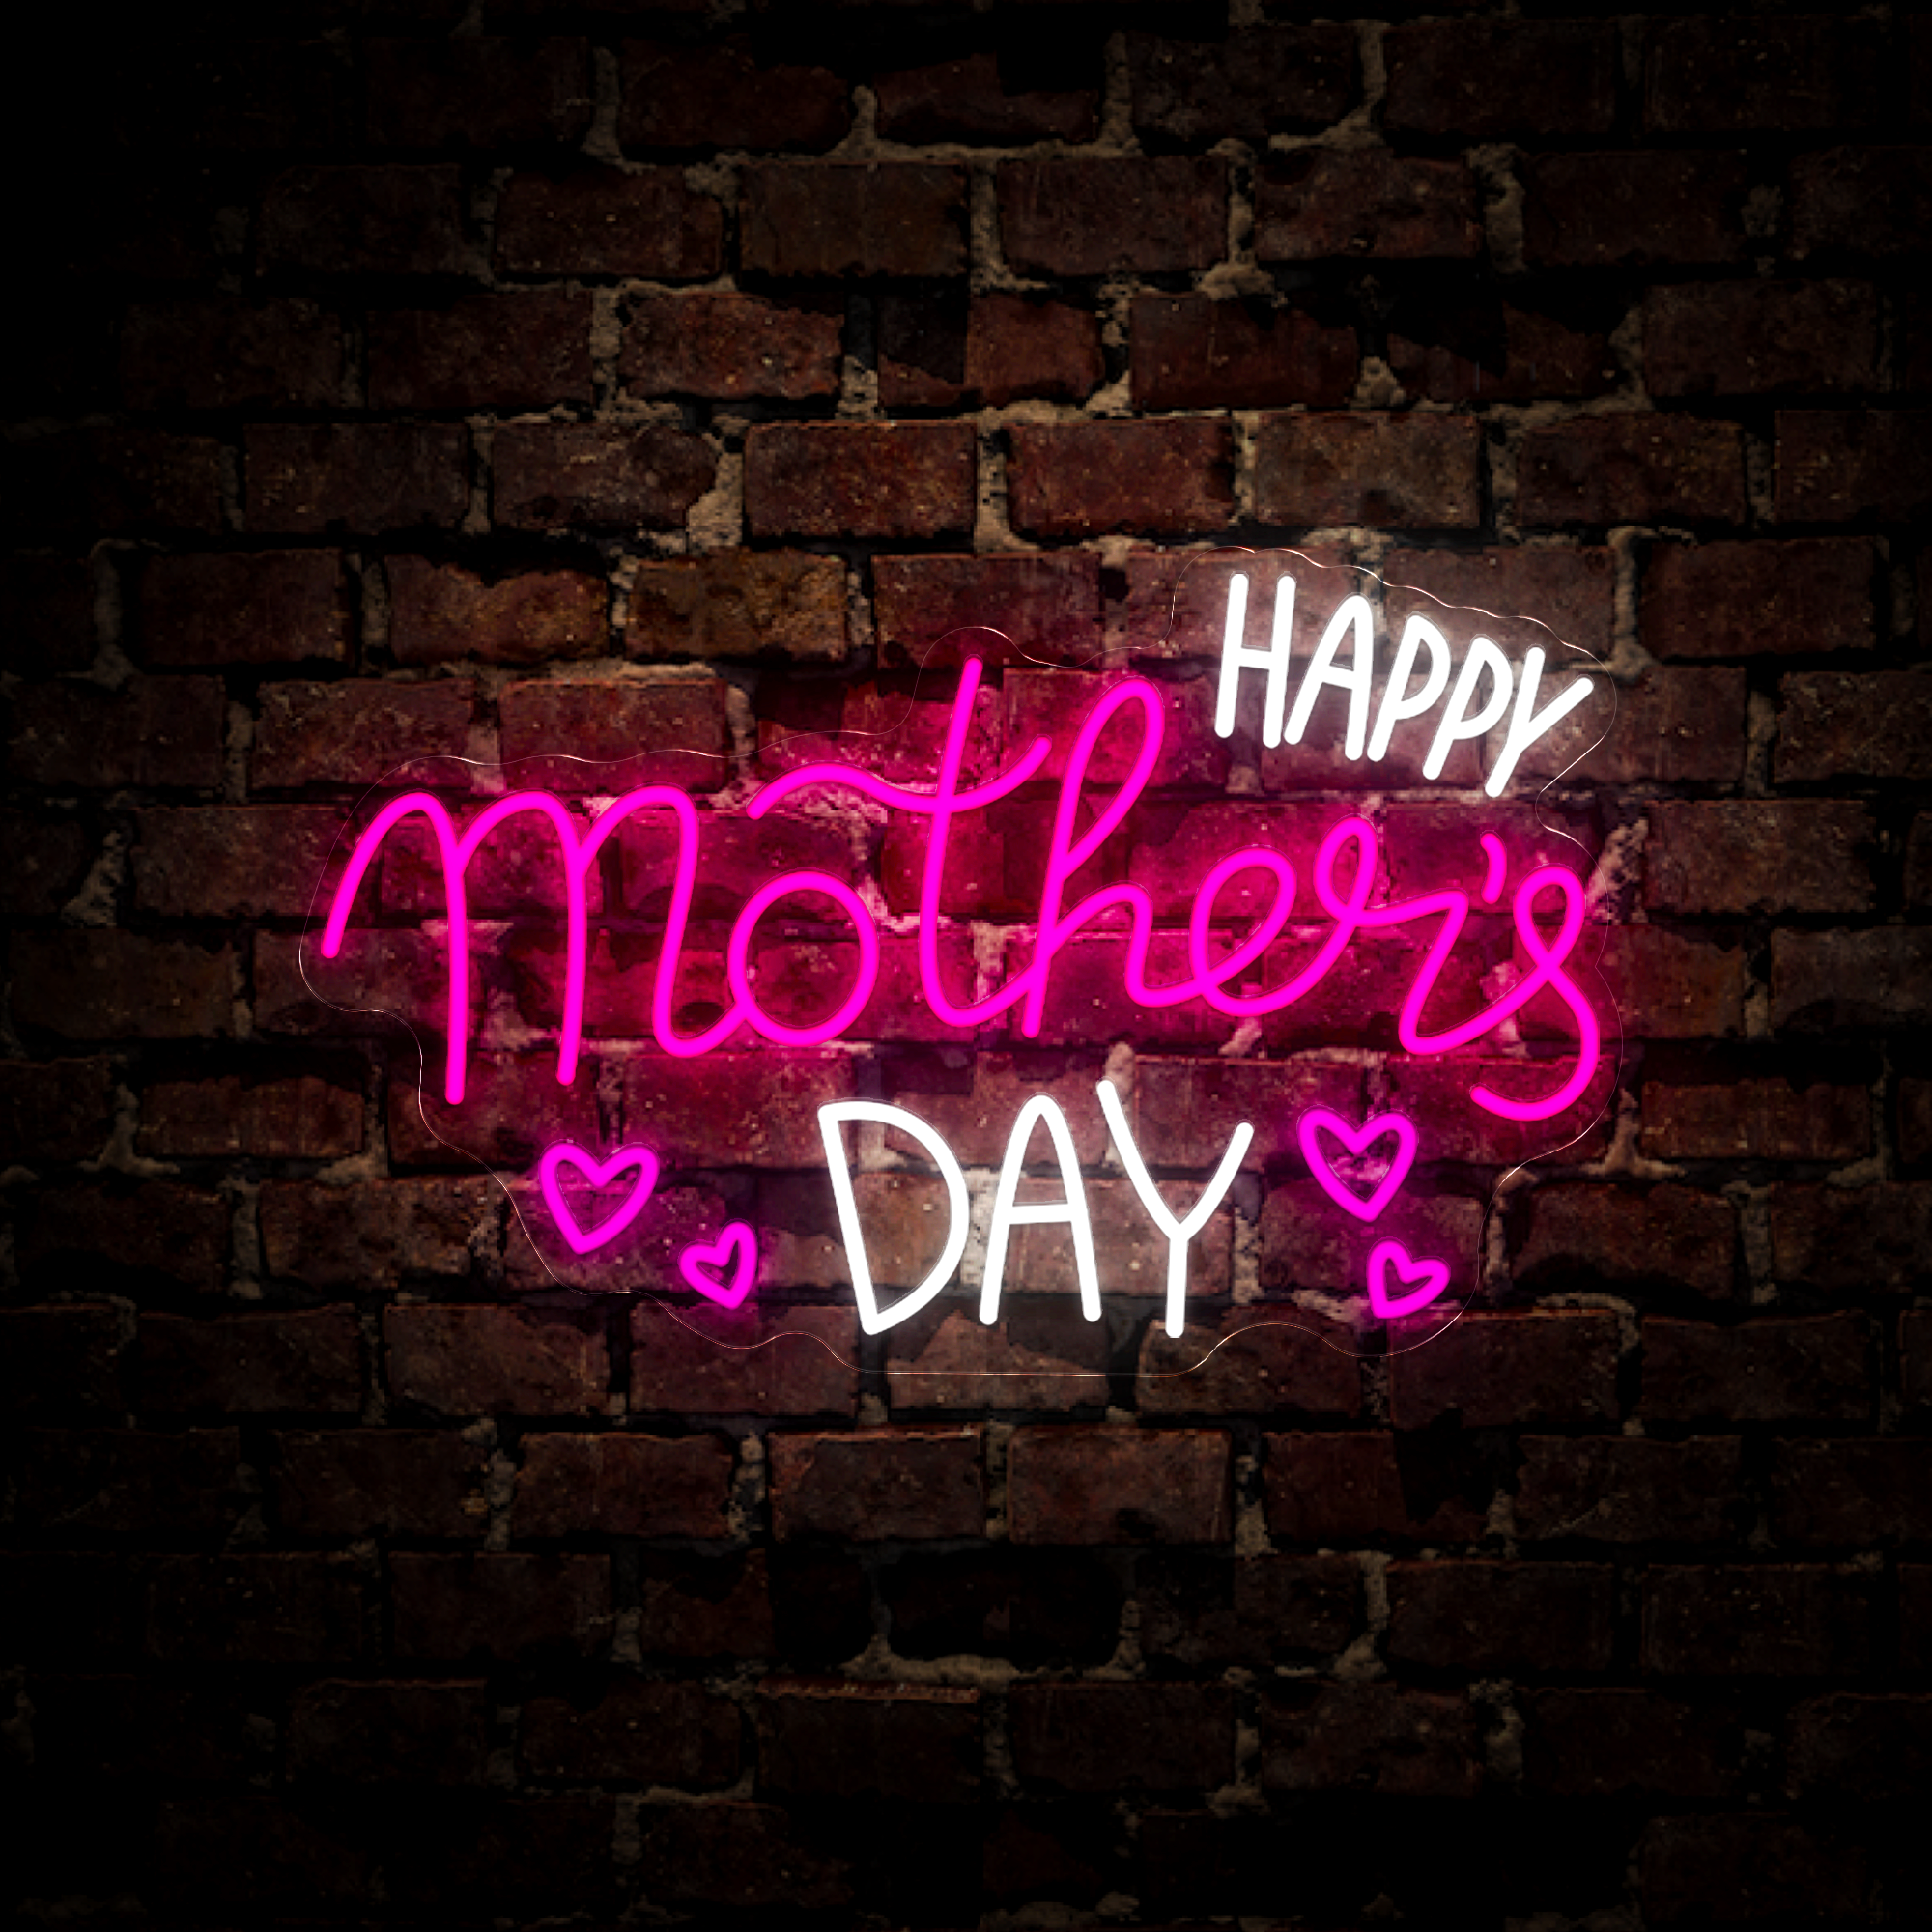 Happy Mother's Day Neon Sign